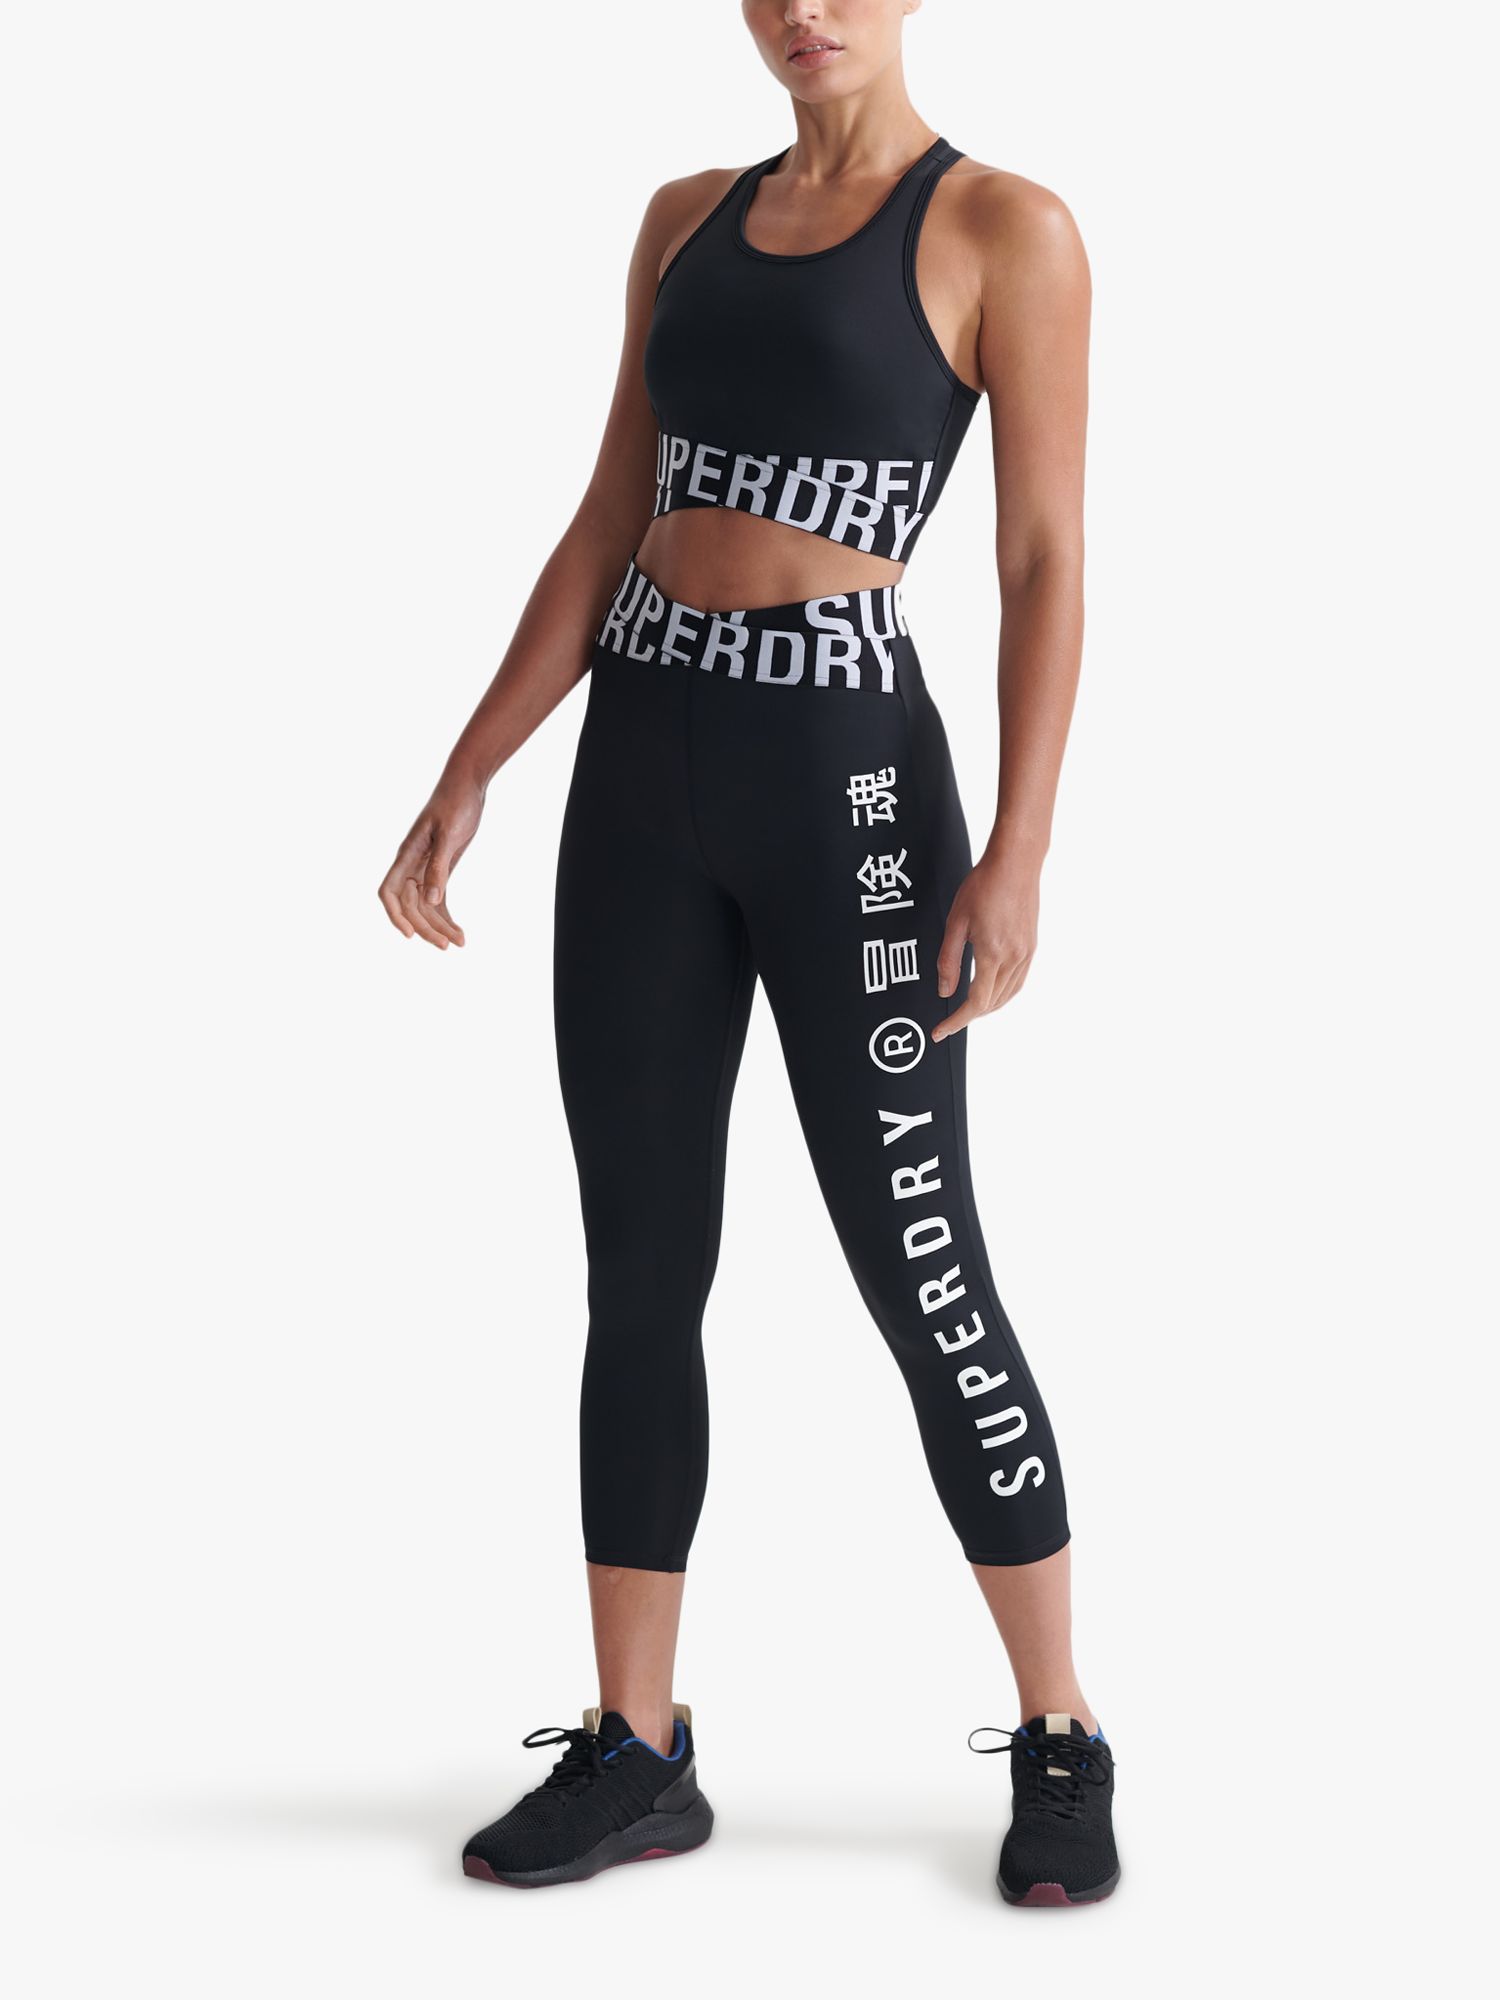 Superdry Core Sports High Waisted Leggings - Black/white